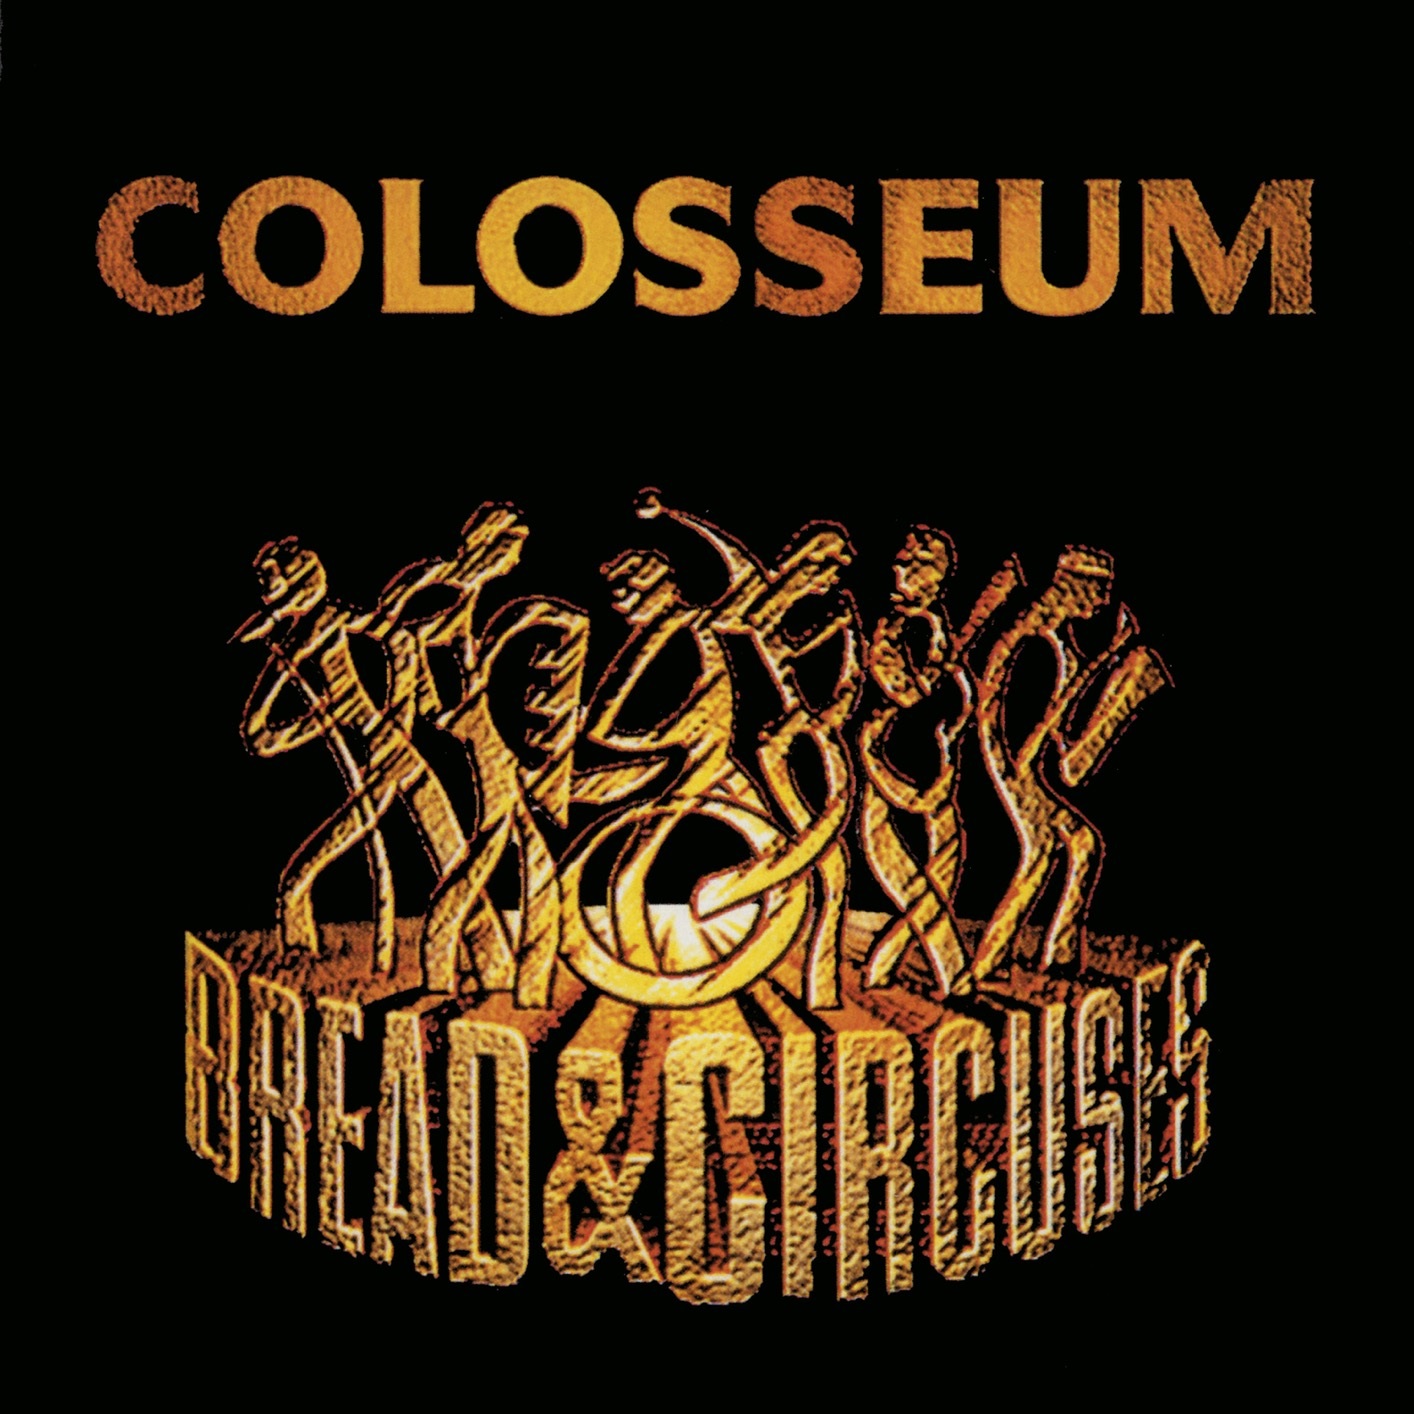 Colosseum - Bread & Circuses (Remastered) (1997/2020) [FLAC 24bit/44,1kHz]